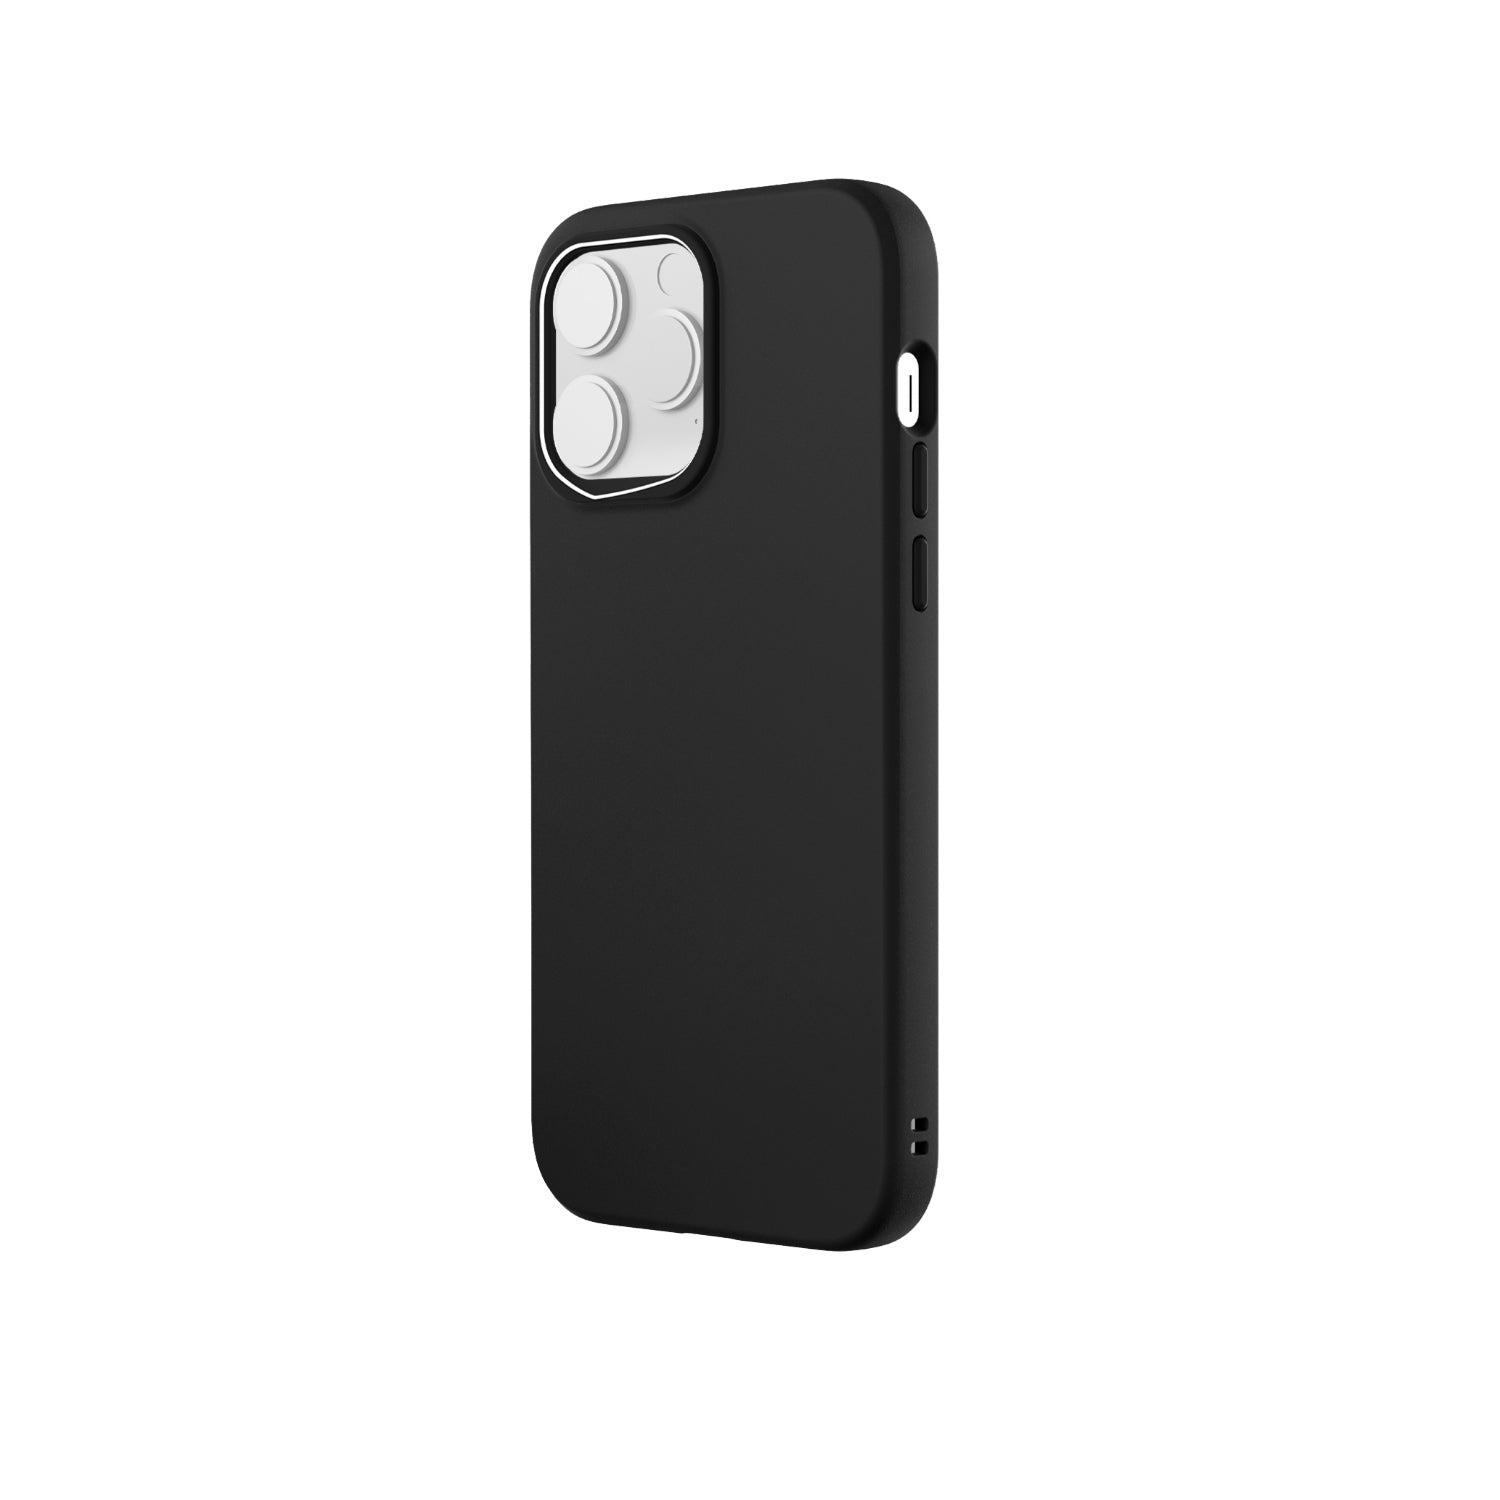 RhinoShield SolidSuit Case for iPhone 14 Series Mobile Phone Cases RhinoShield Classic Black iPhone 14 Pro 6.1" 